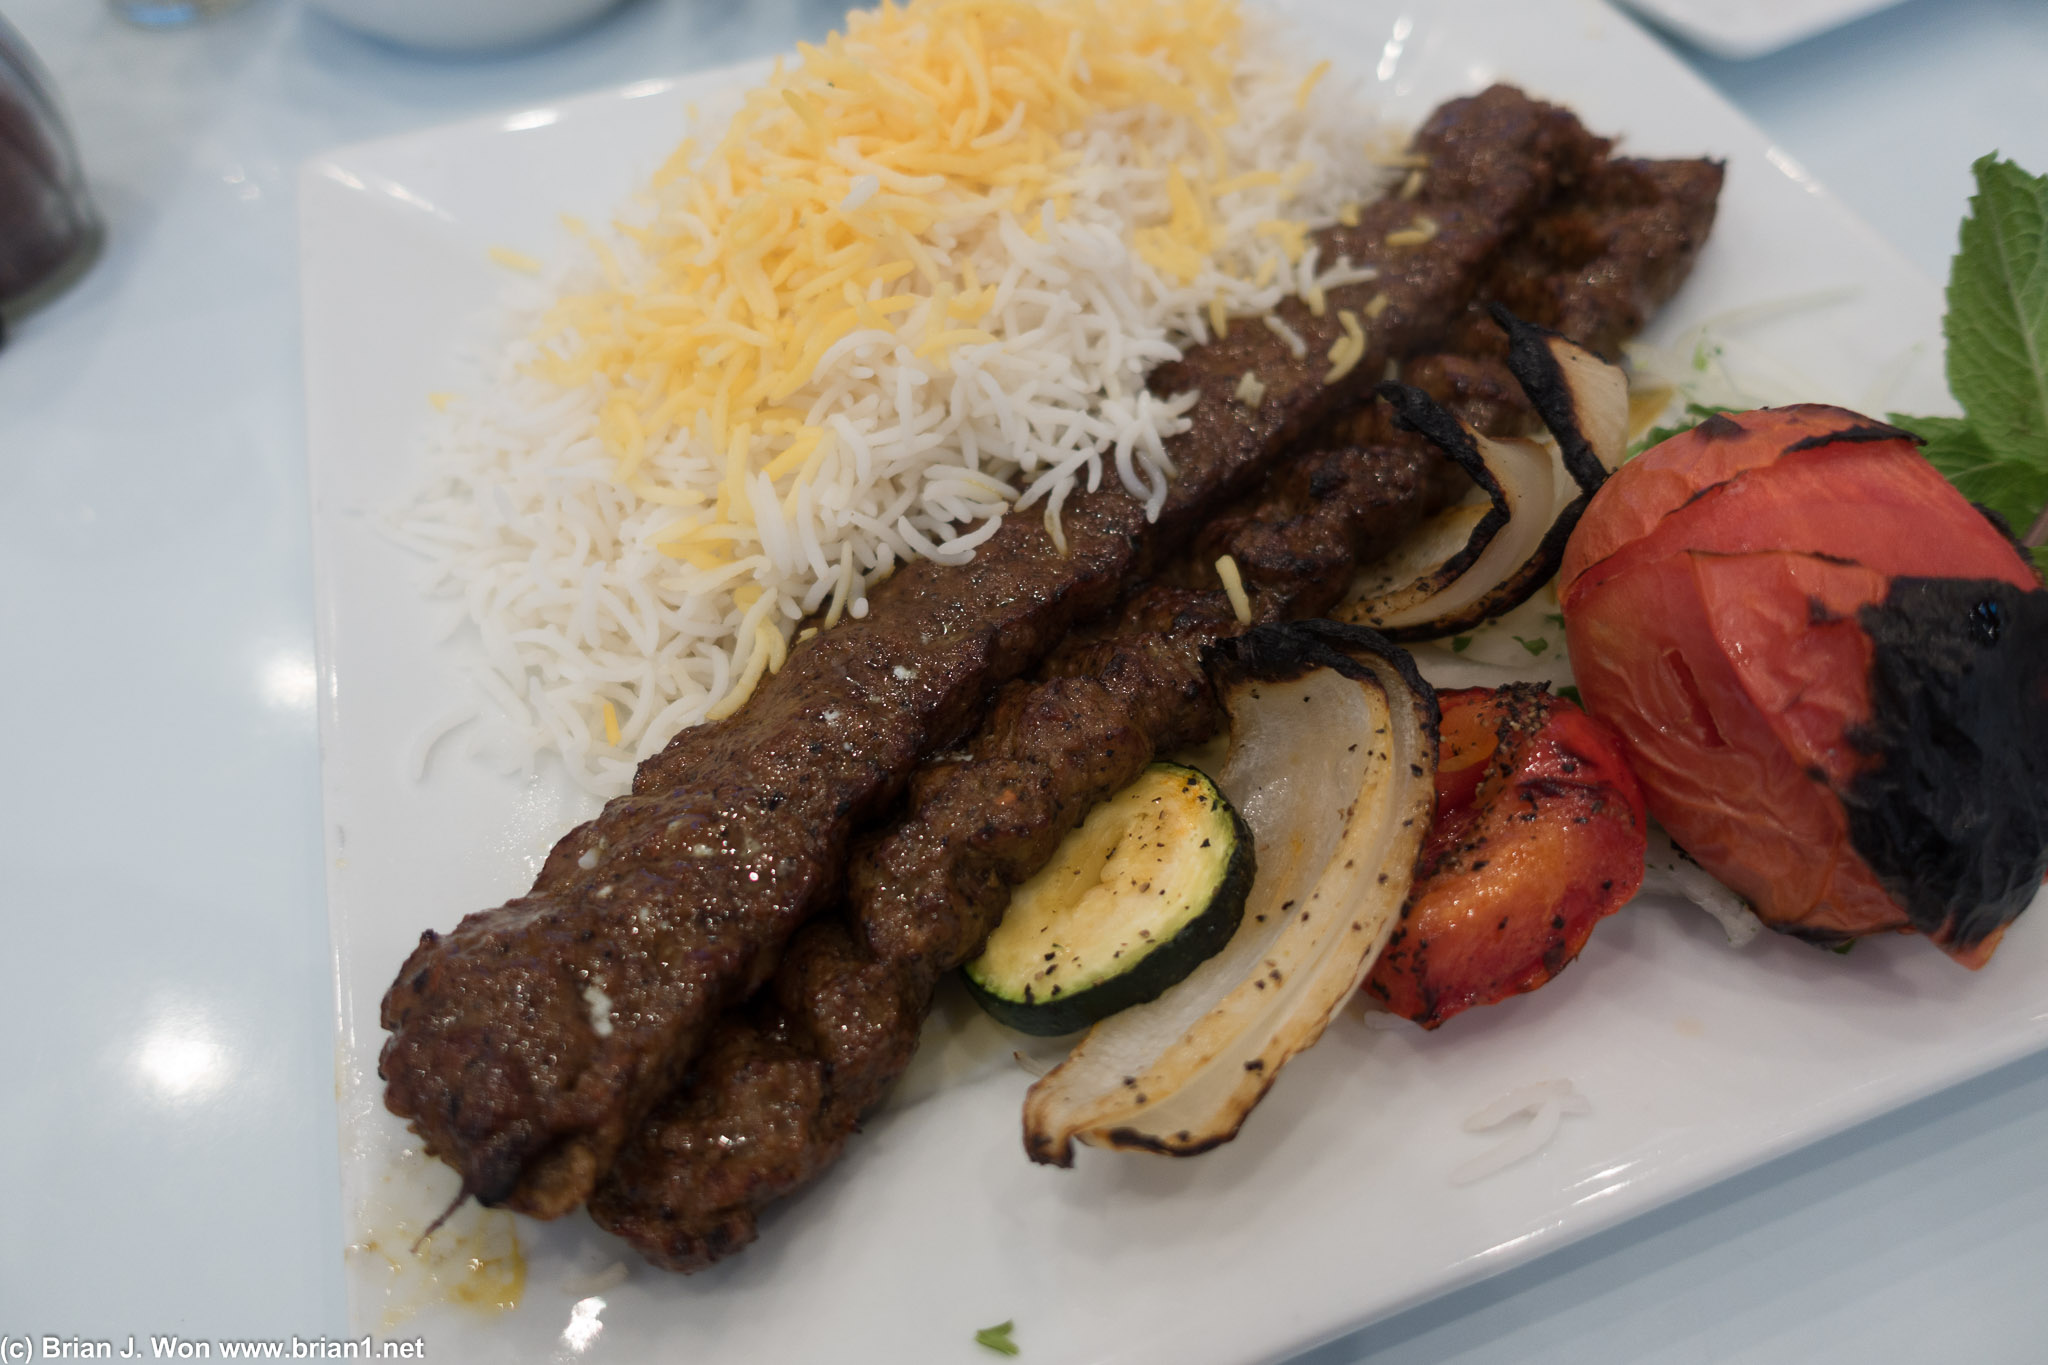 Ground sirloin kebab. Tender and juicy (probably from fat!).